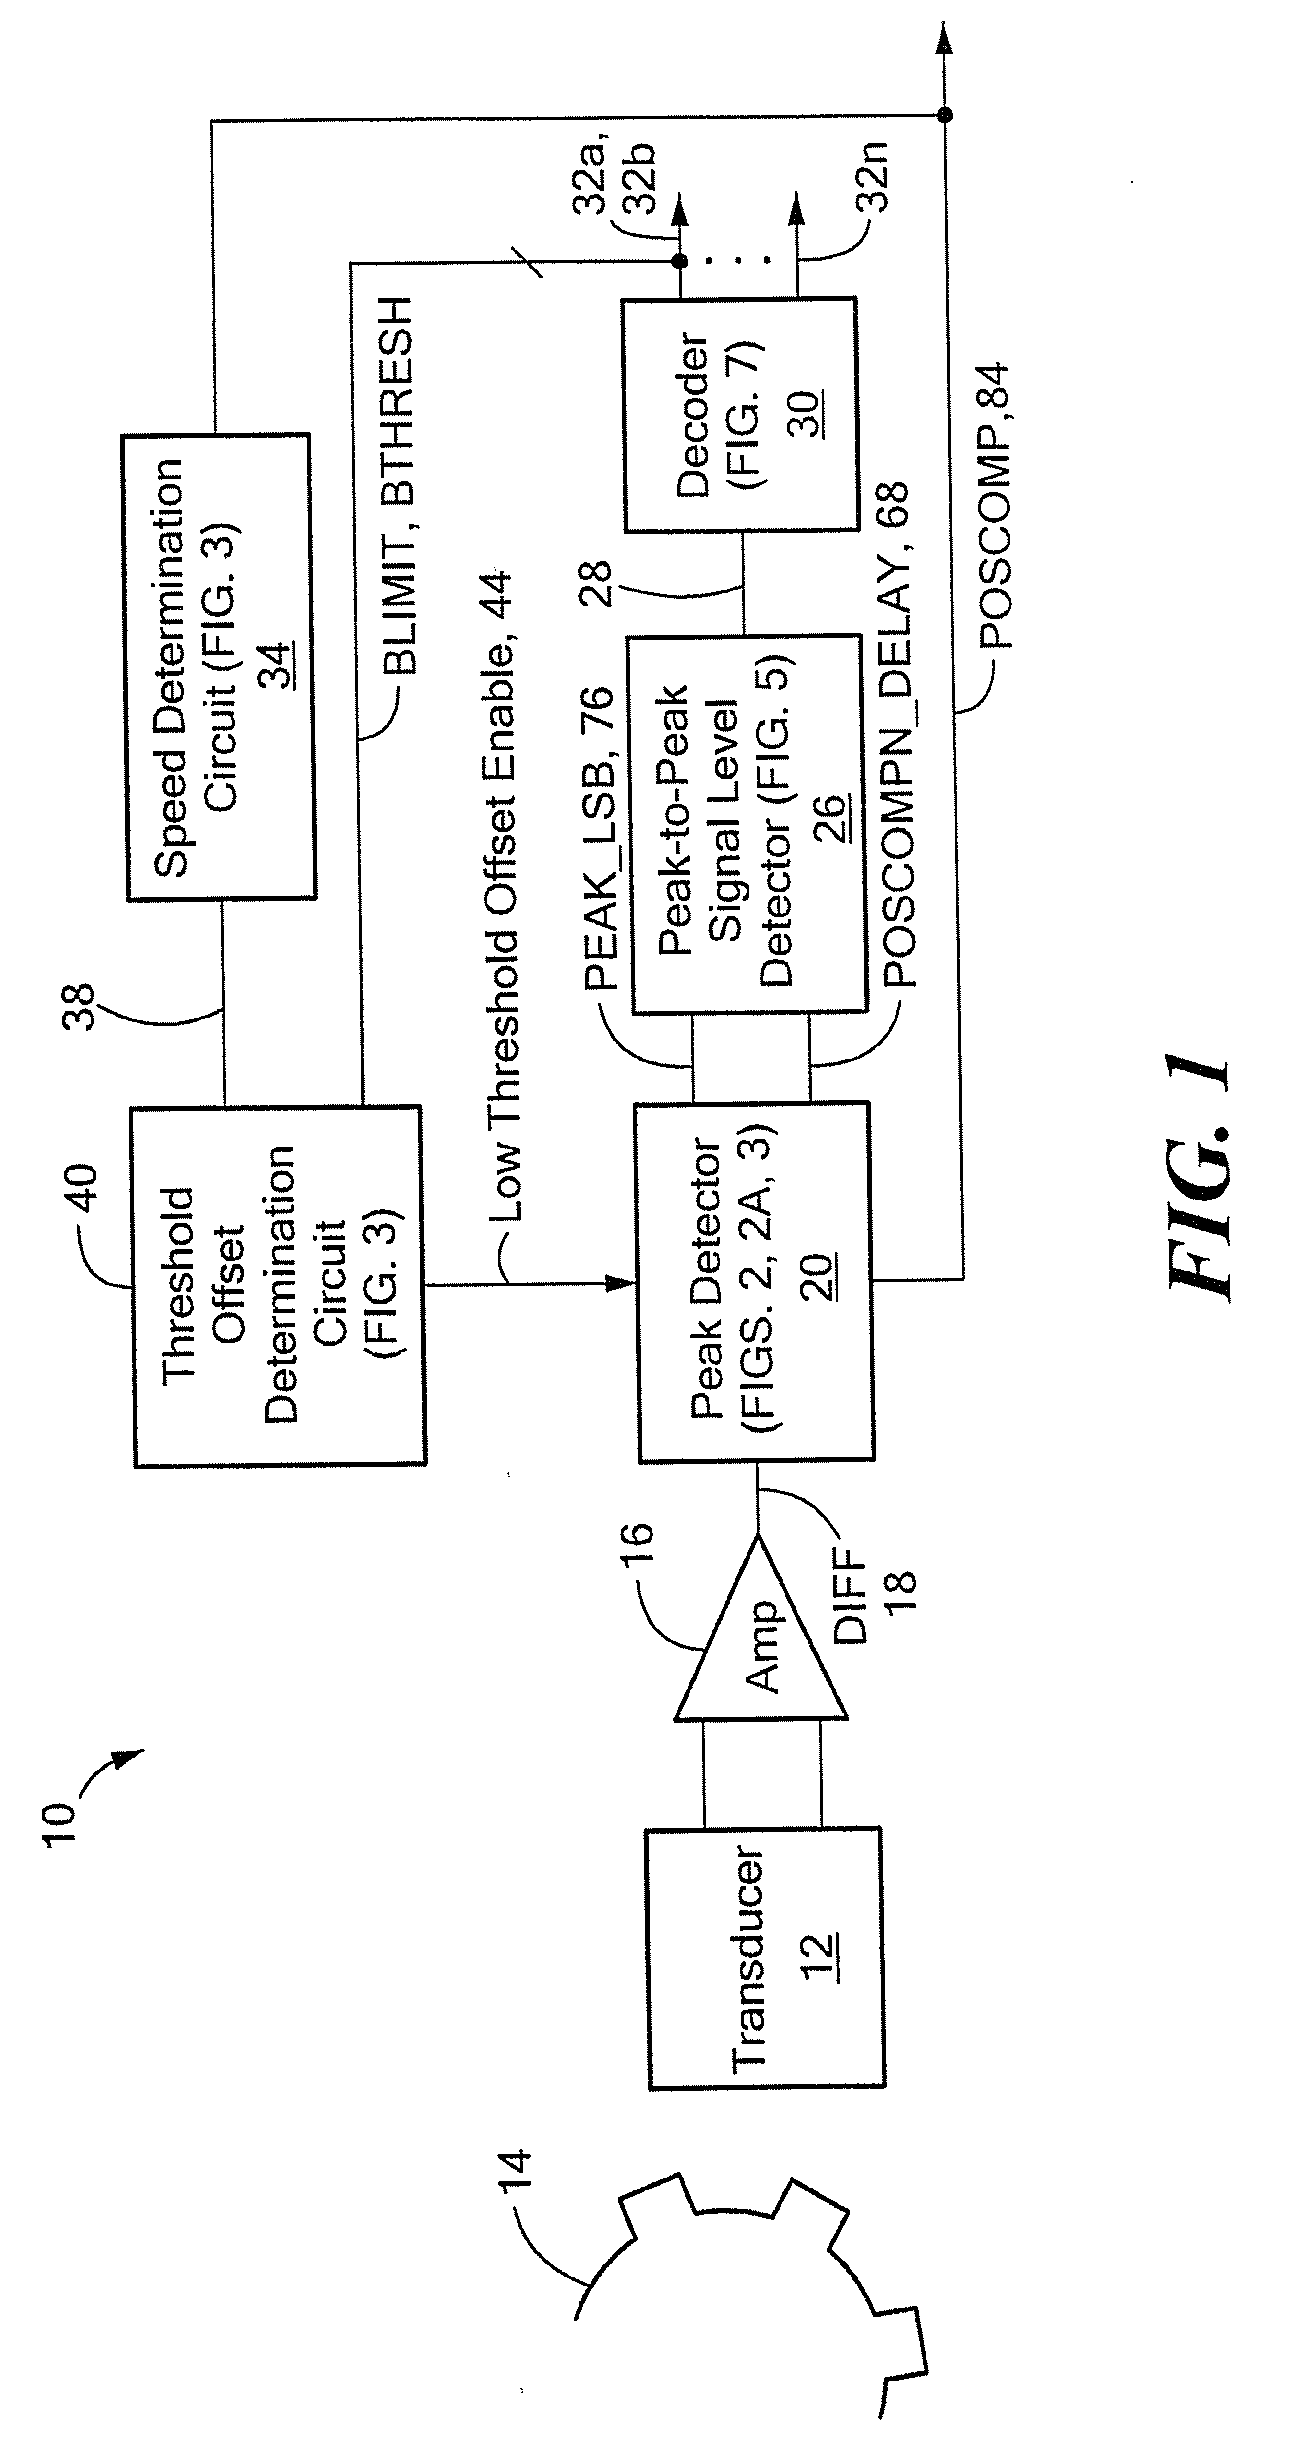 Magnetic field detector having a variable threshold